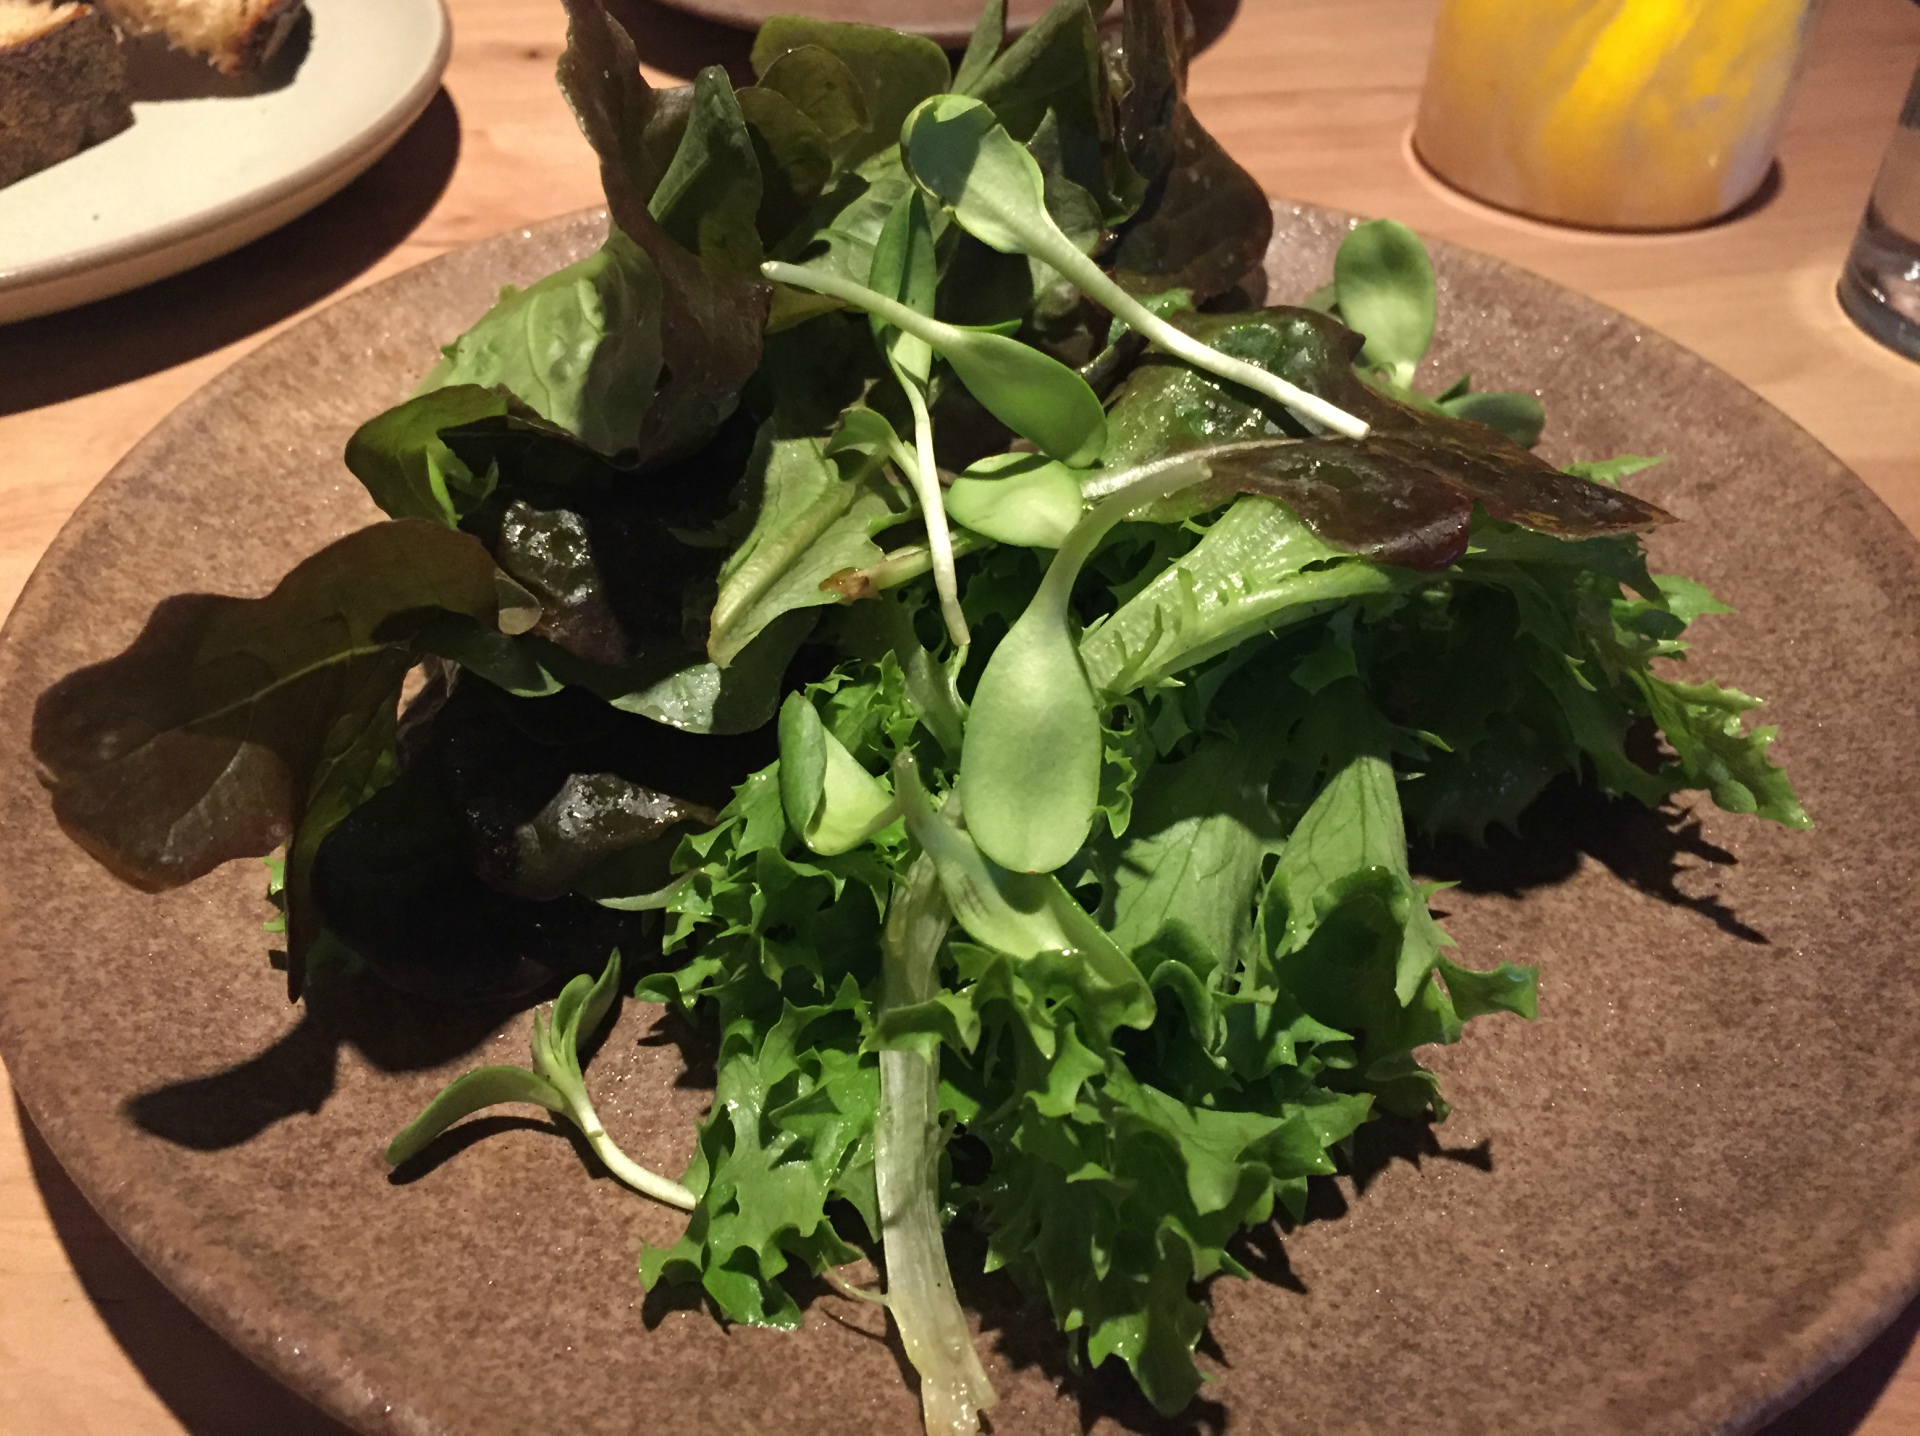 The restaurant's greens come from an aquaponic farm in West Oakland.